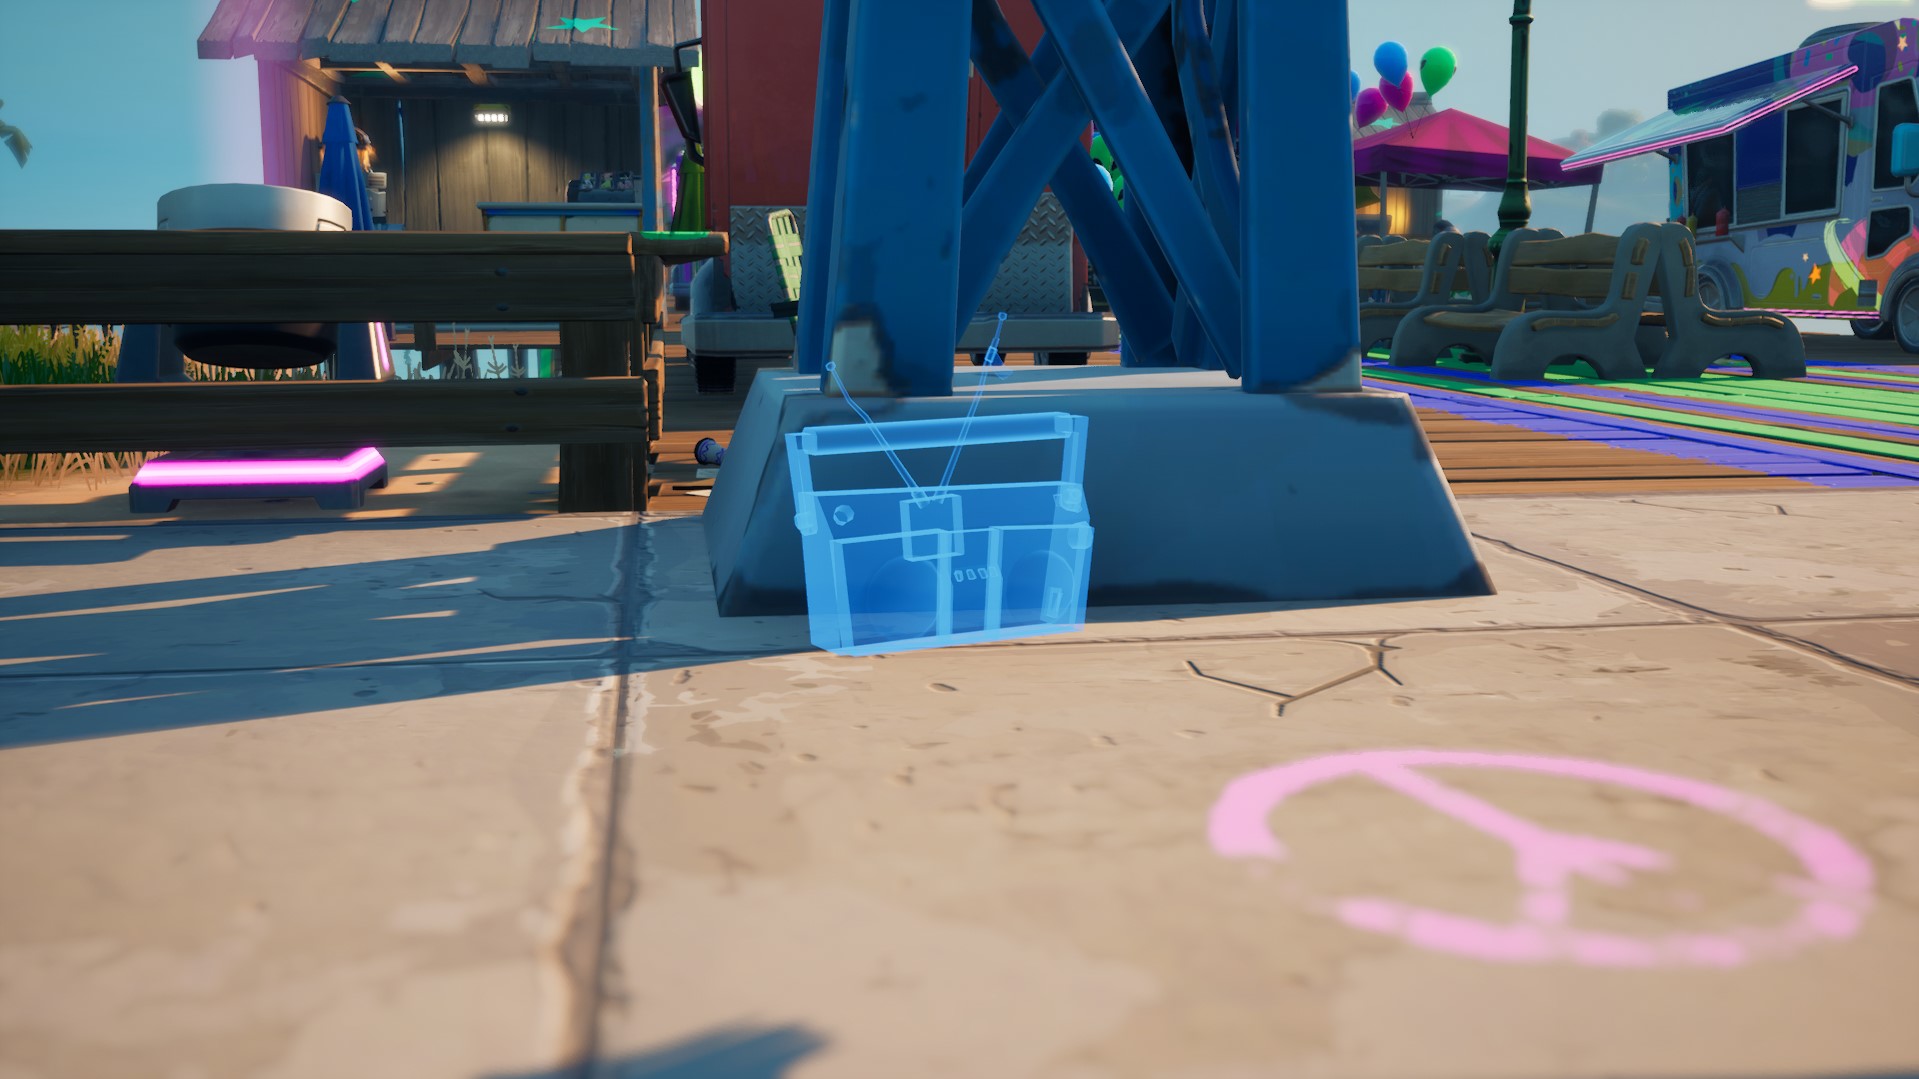 Place boomboxes in Believer Beach - Fortnite Chapter 2 Season 7 legendary challenge  